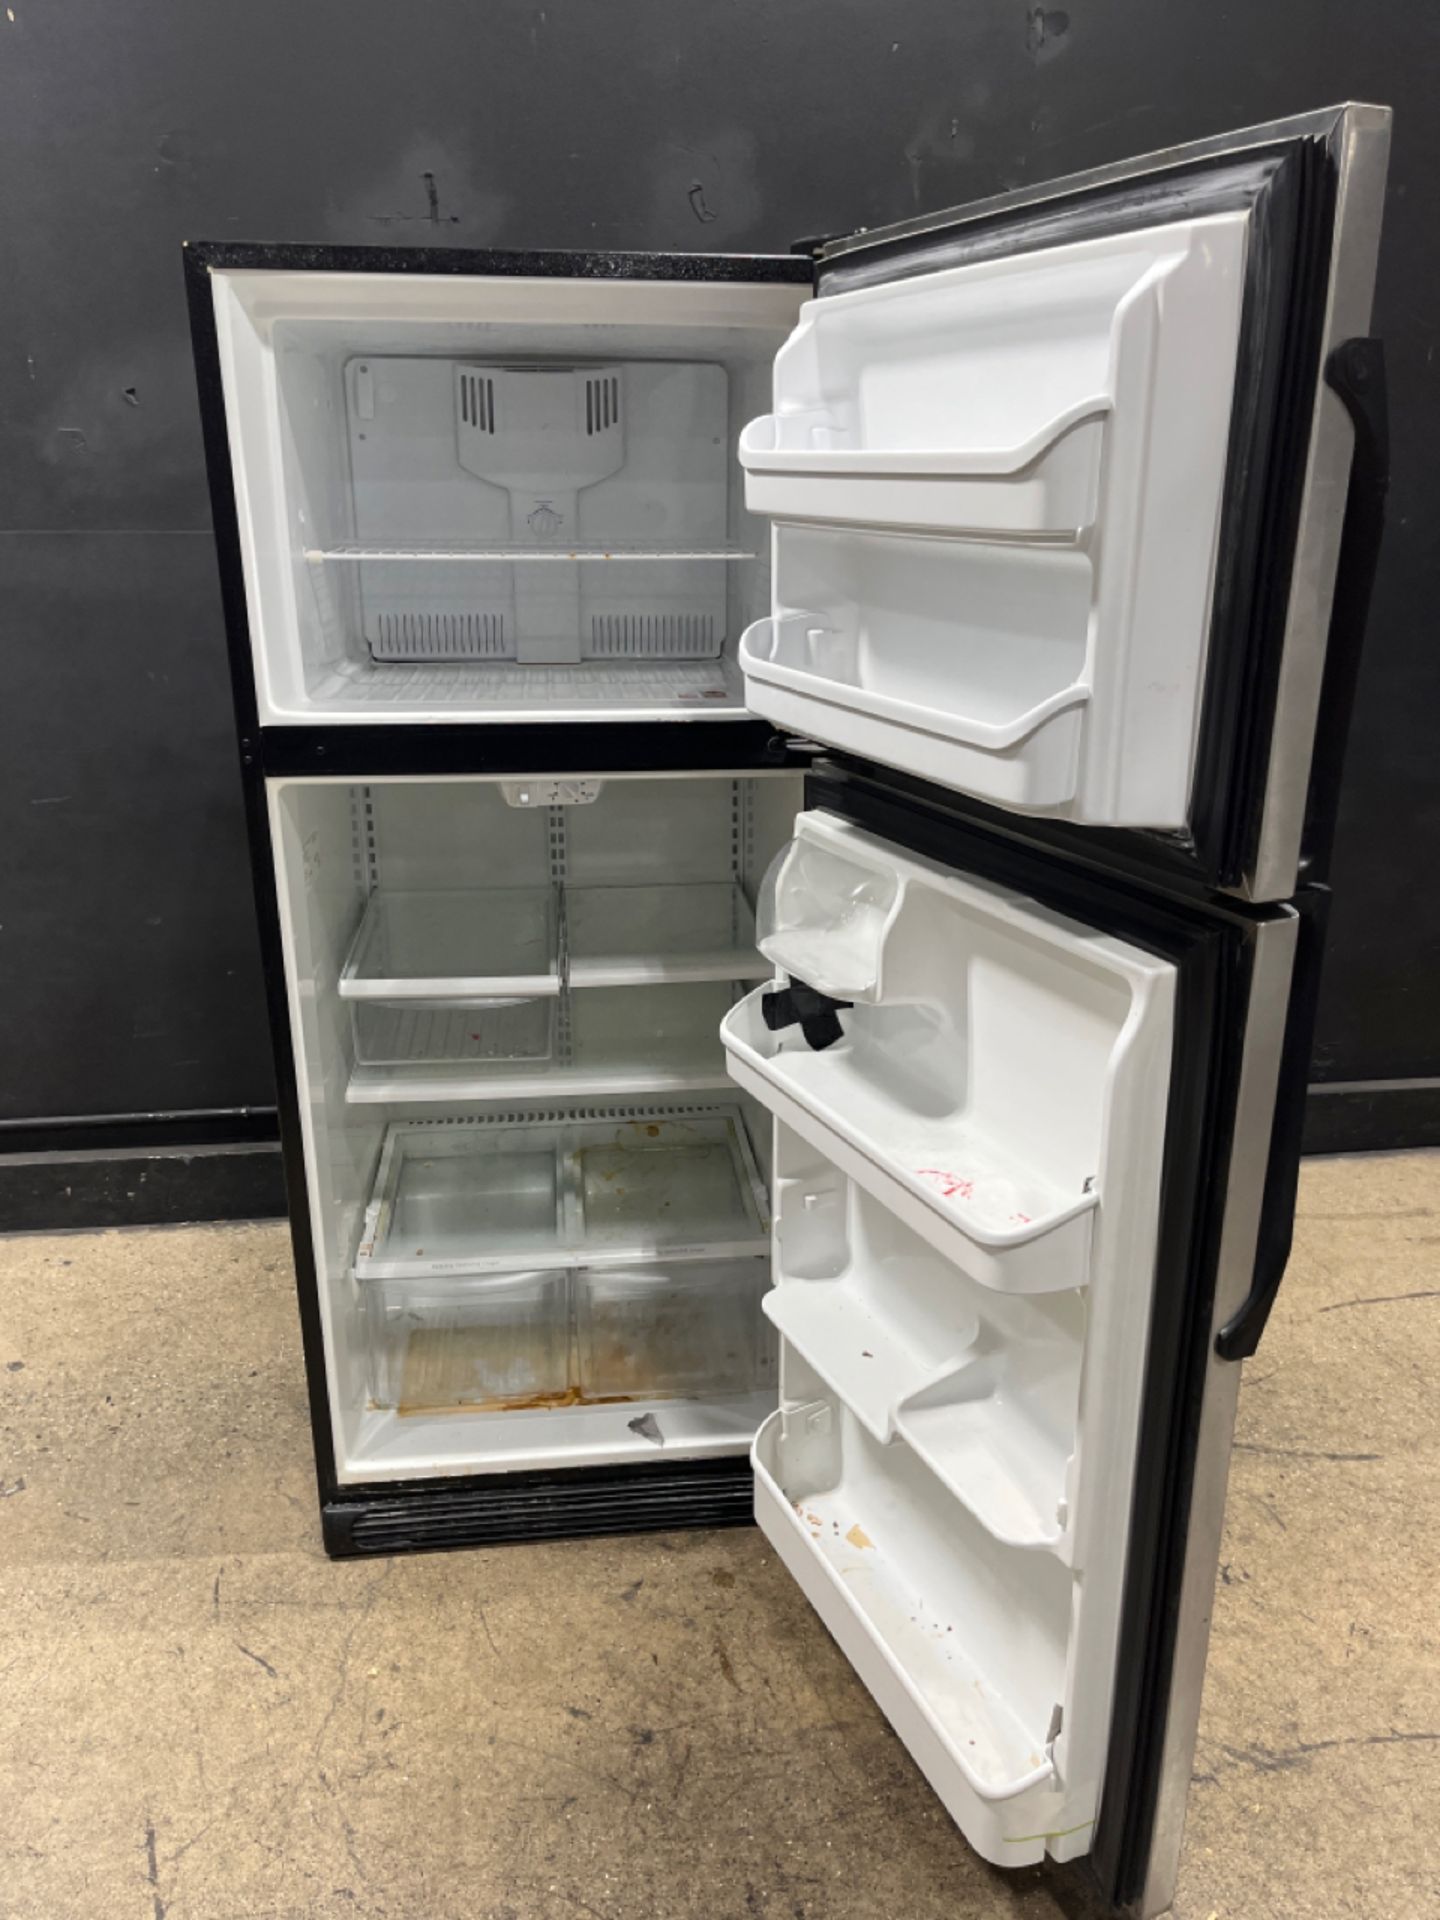 FRIGIDAIRE REFRIGERATOR (LOCATED AT 3325 MOUNT PROSPECT ROAD, FRANKLIN PARK, IL, 60131) - Image 3 of 4